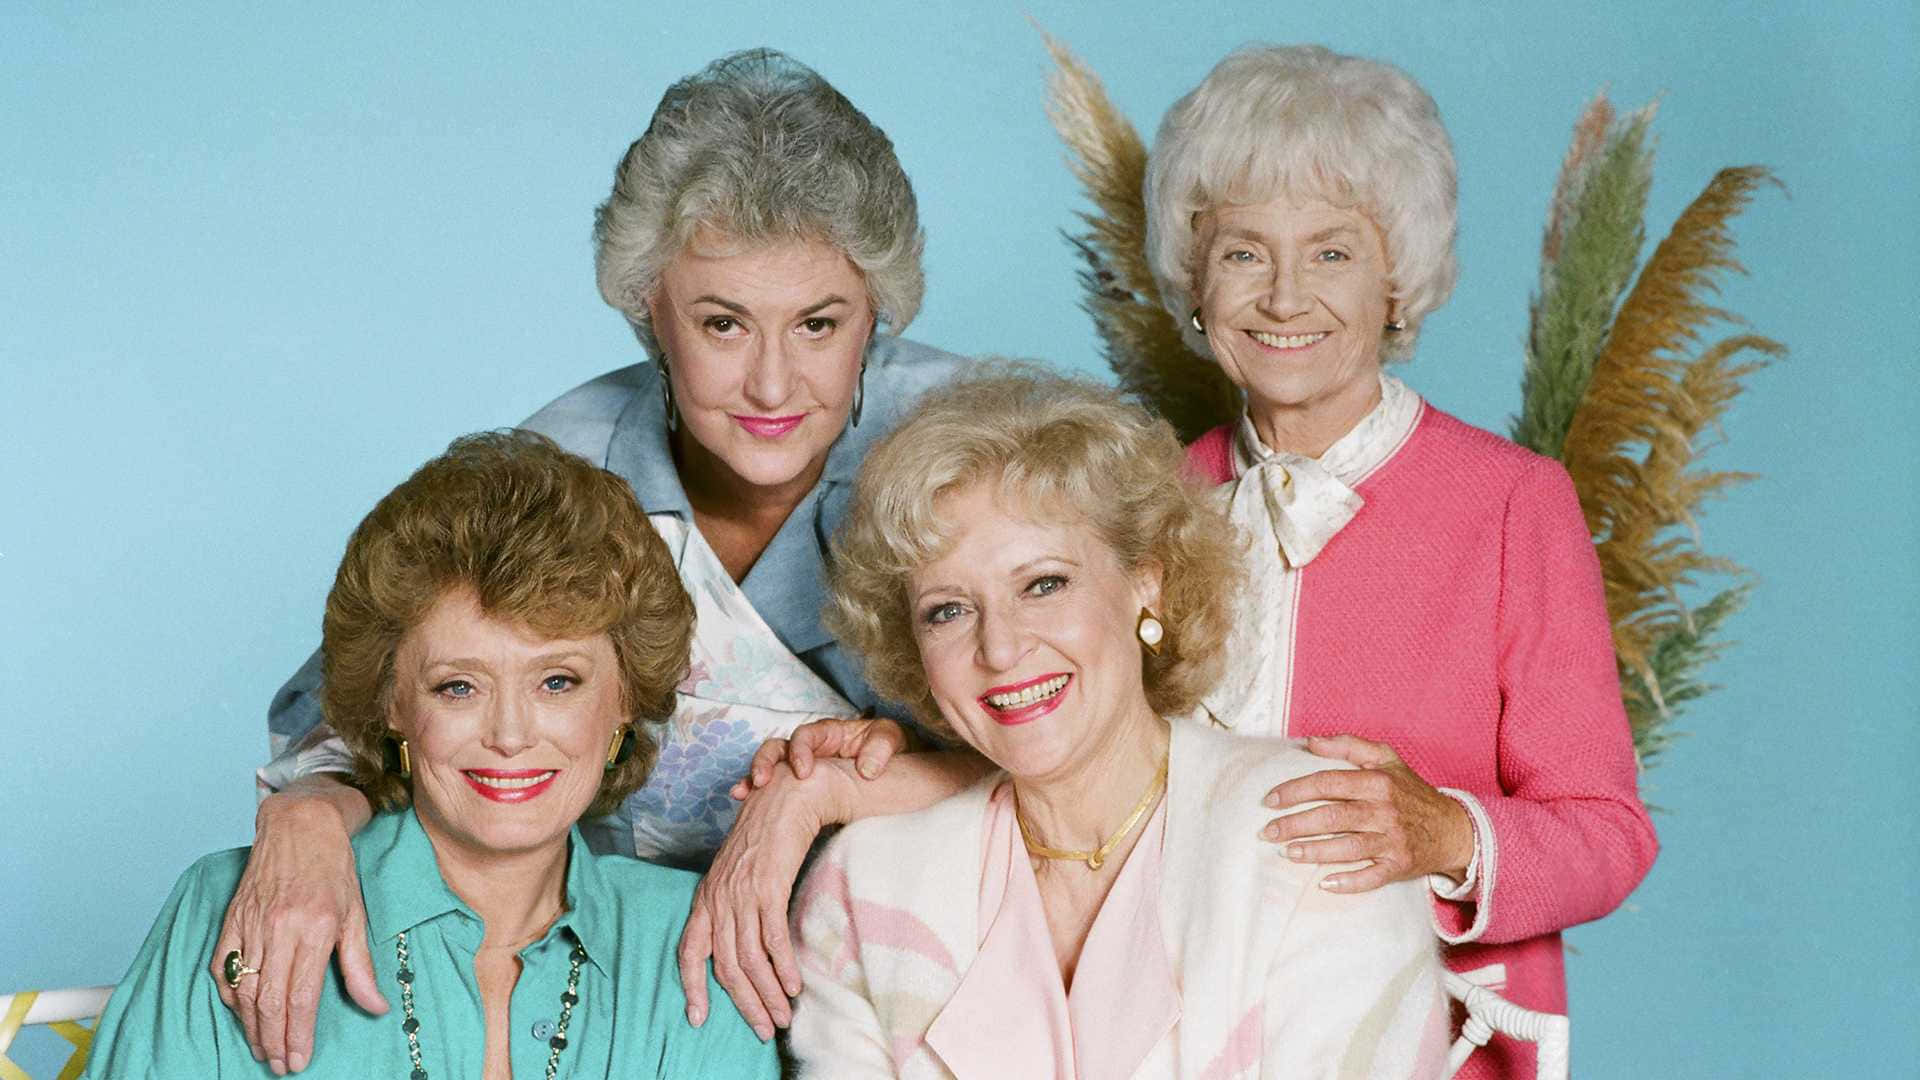 The Golden Girls - A Group Of Women Posing For A Photo